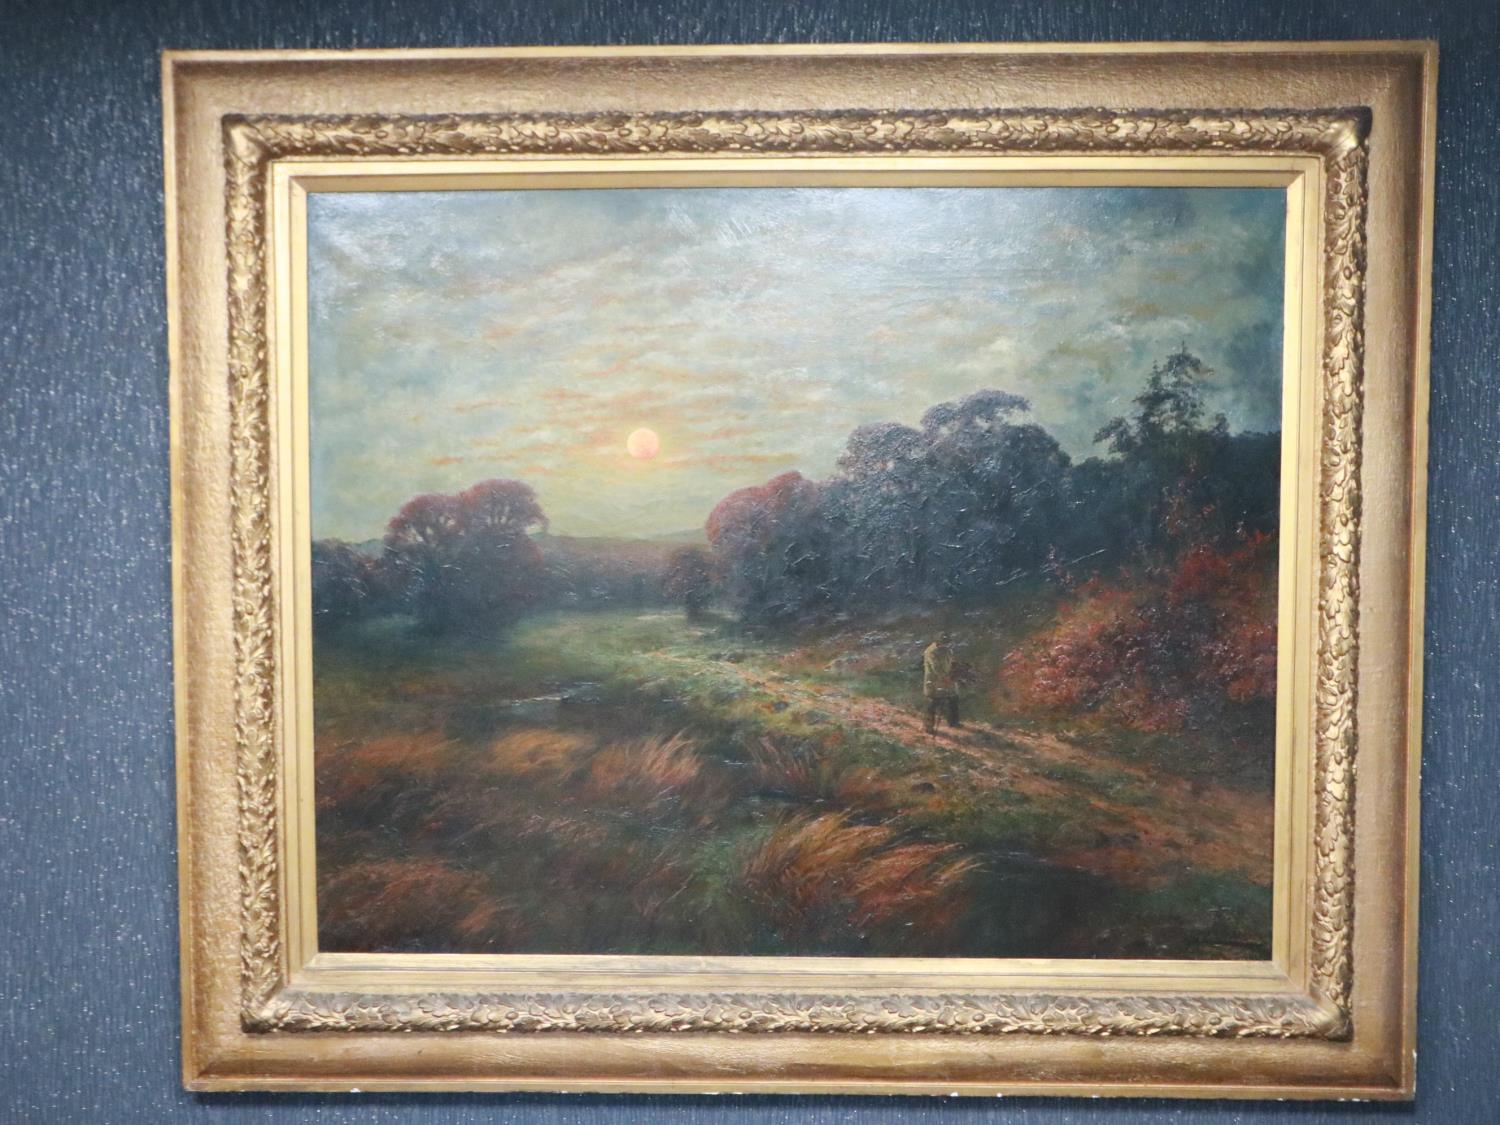 R C Markham (late 19th / early 20th century): substantial oil on canvas, figure on a country lane, - Image 2 of 3